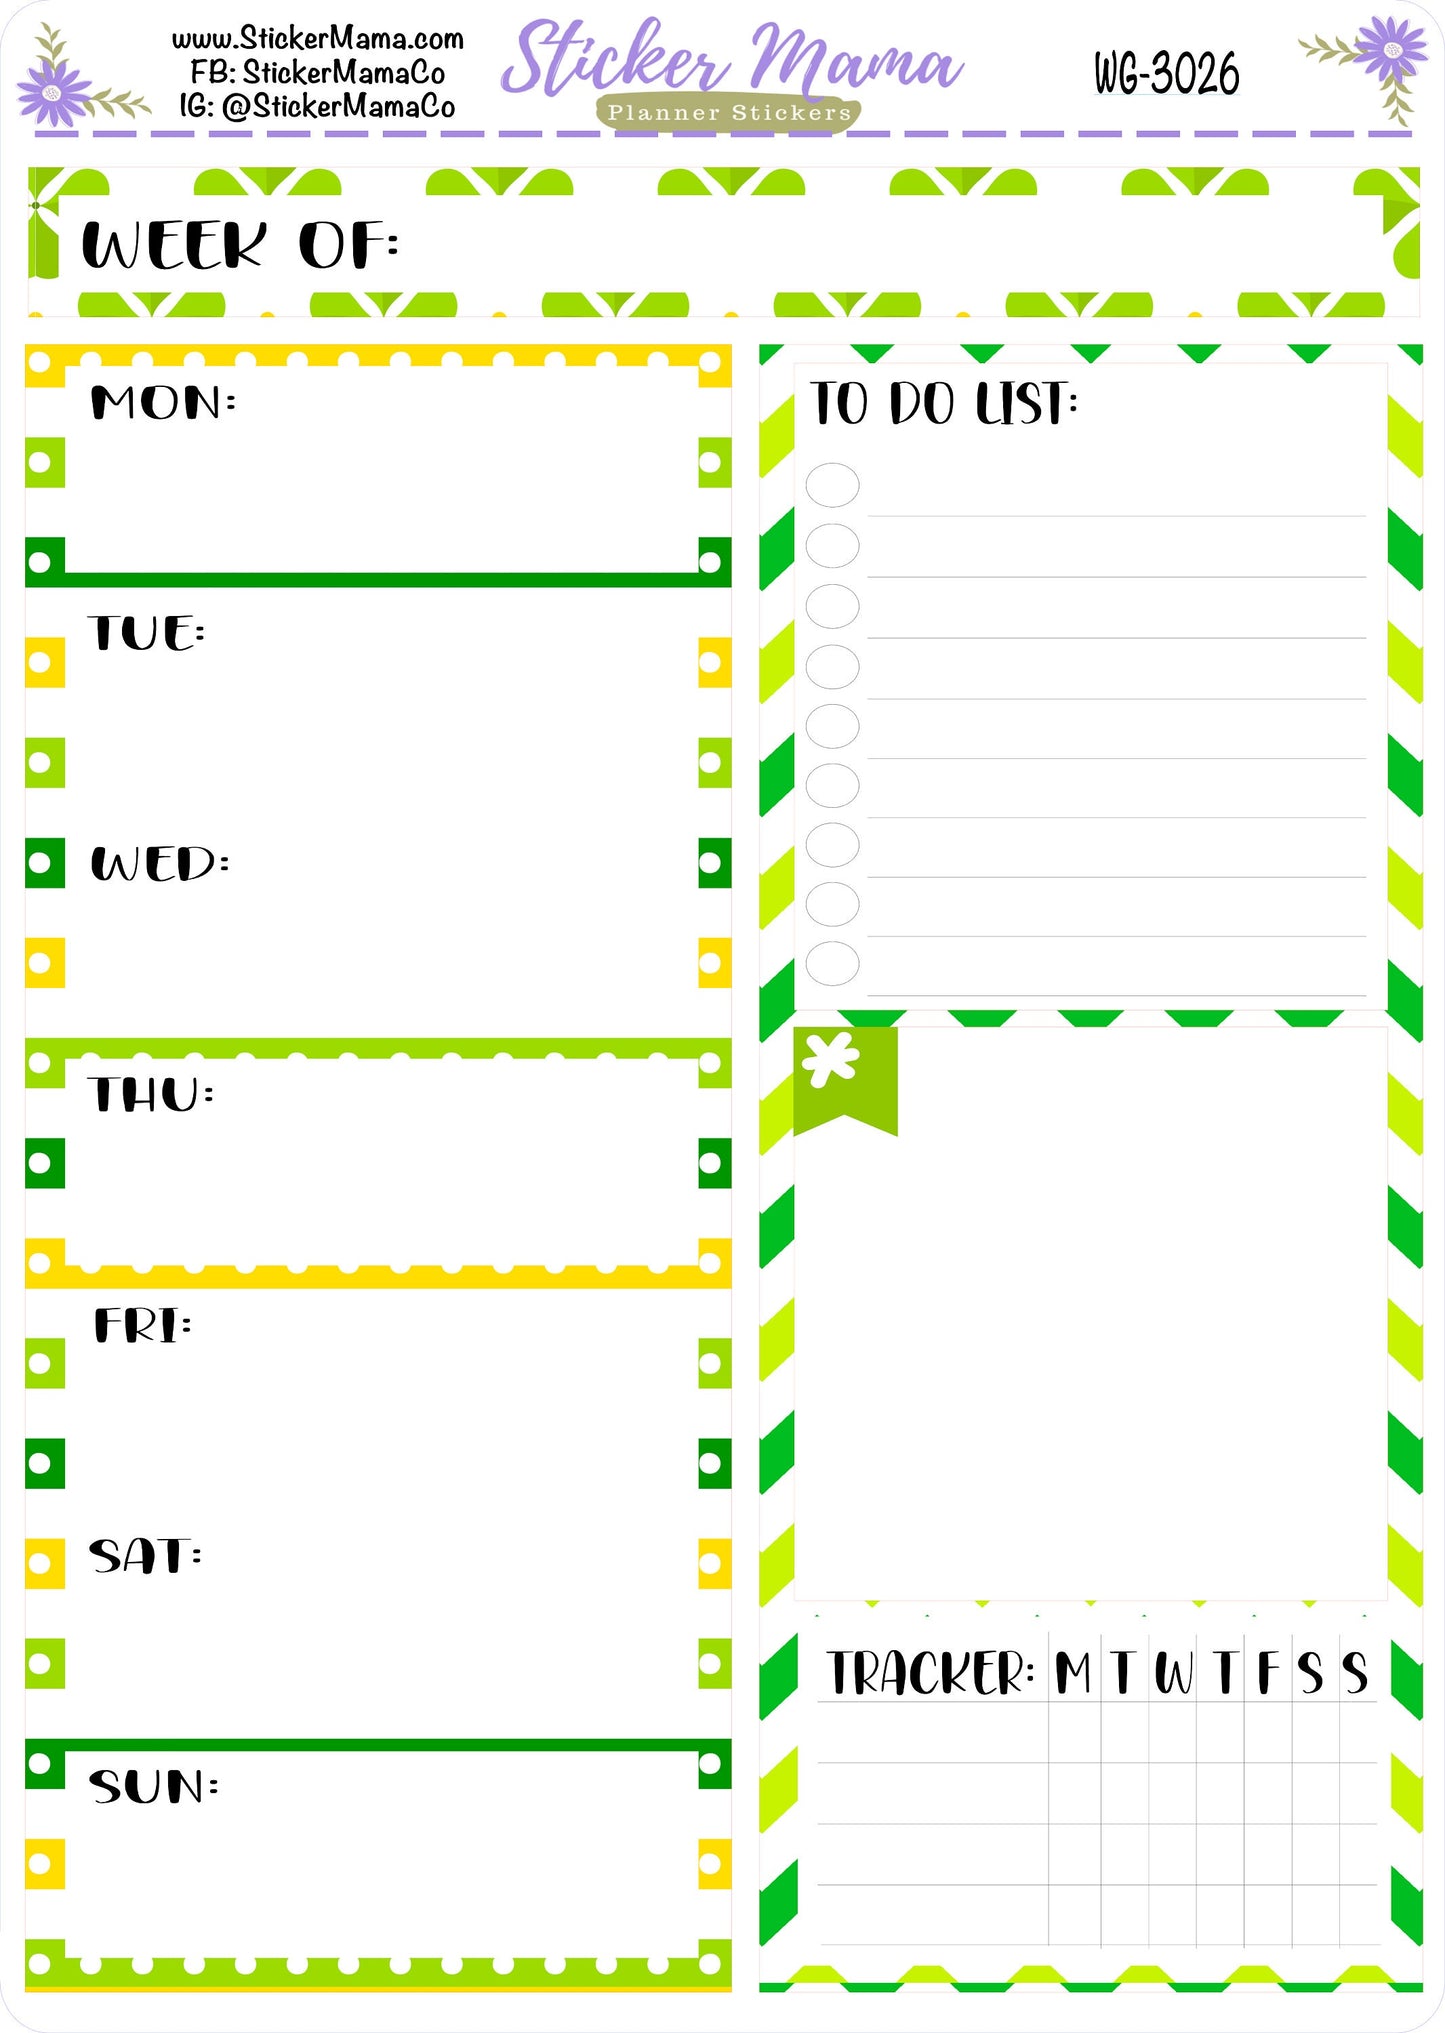 WG-3026 St. Patricks Day || WEEK at a GLANCE -  - weekly glance 7x9 or a5